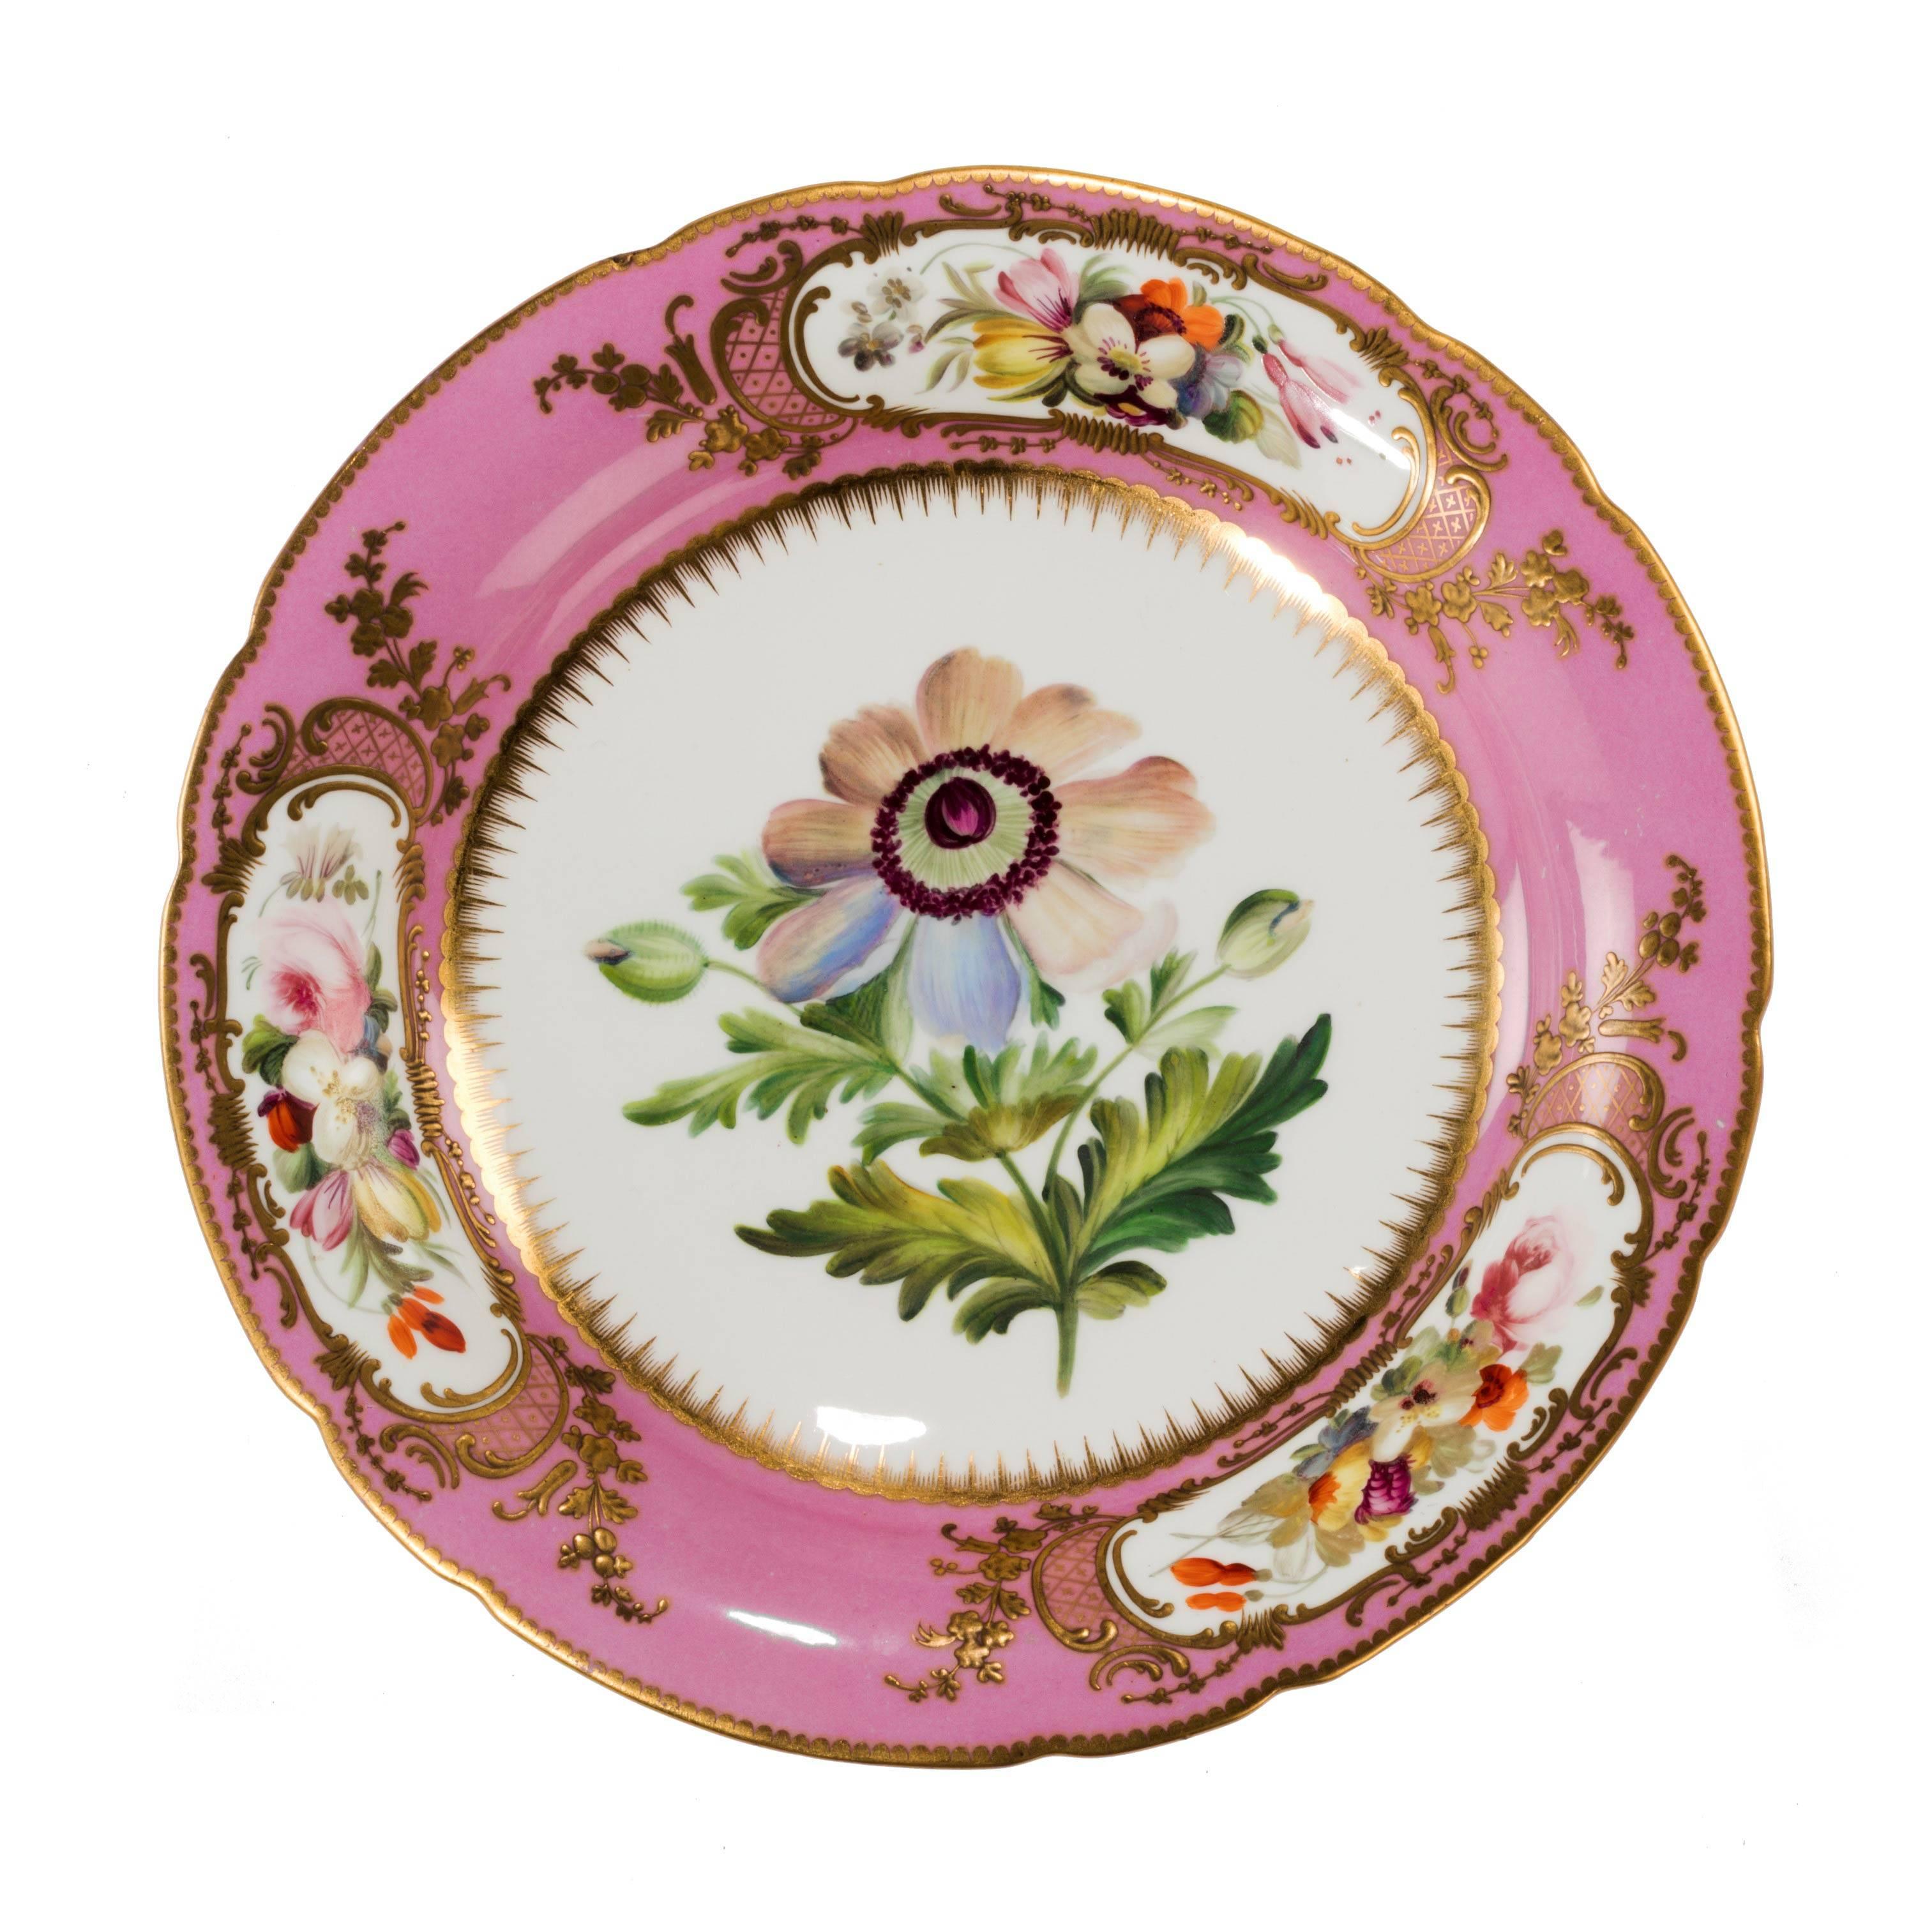 A fine set of six English porcelain botanical plates consisting of two dessert plates and four comports, retailed by Daniell of London. Almost certainly Coalport. Finely painted with swathes of flowers and foliage within borders of raised gilded